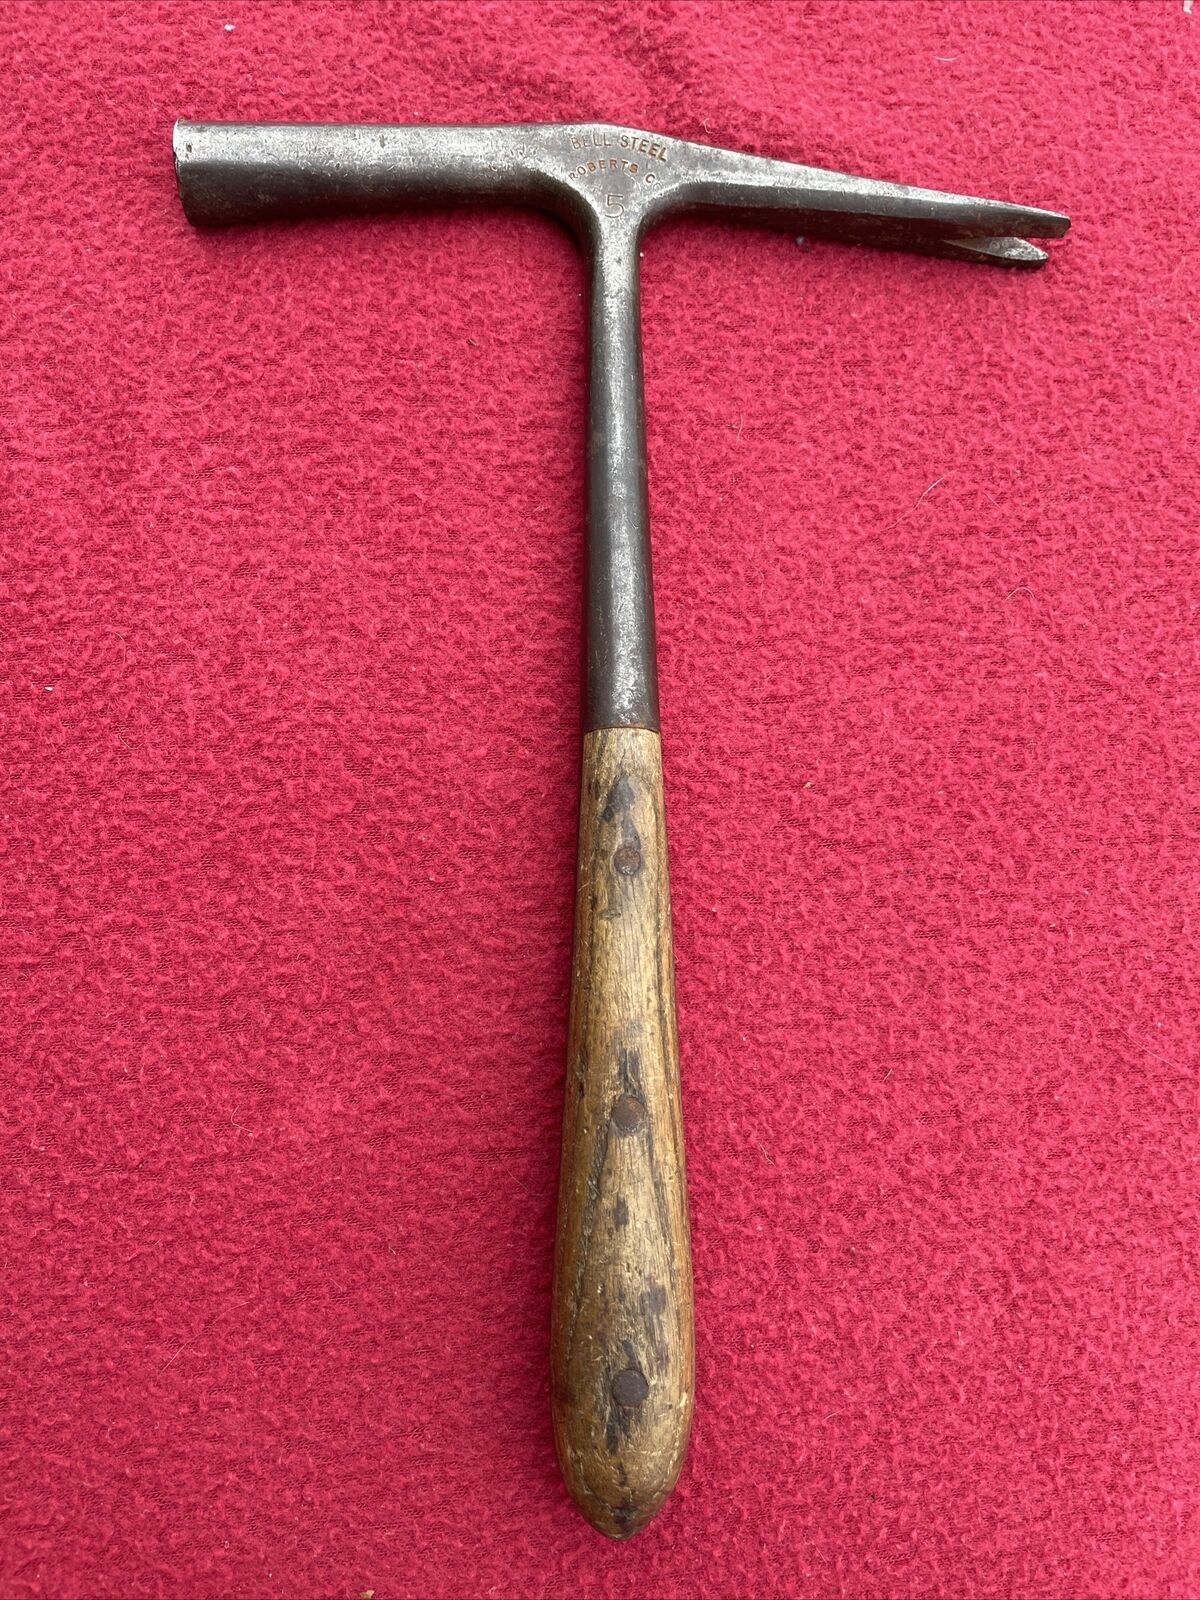 VINTAGE ROBERTS Co. TACK HAMMER No. 5 MADE IN Western Germany